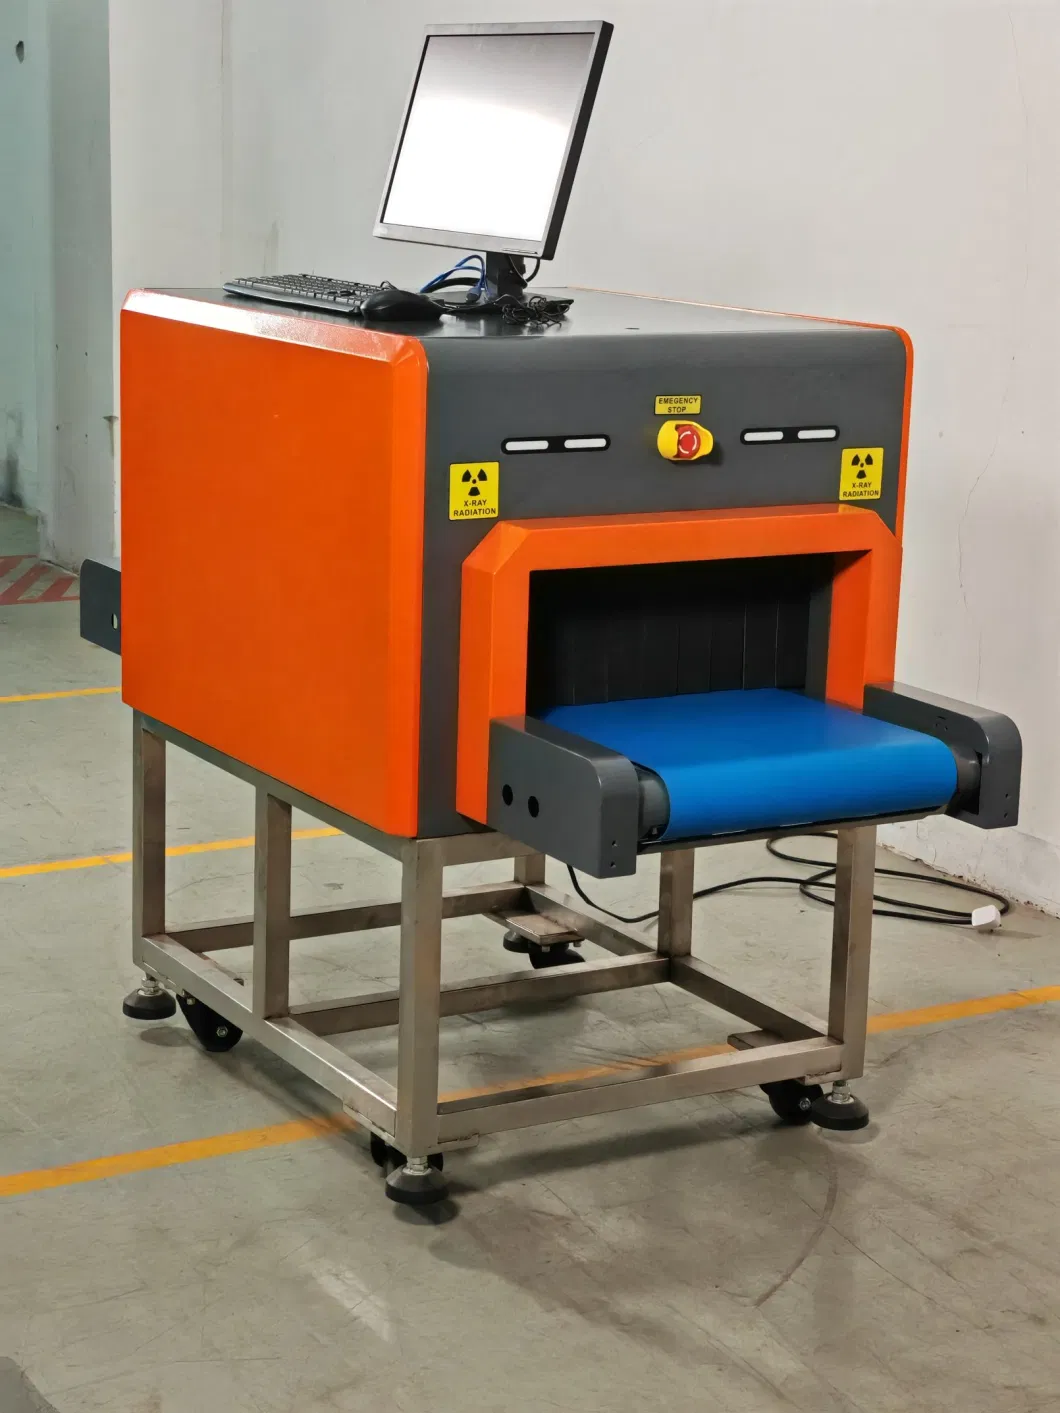 Low Cost Checkpoint Endpoint Security Luggage Baggage X Ray Screening System